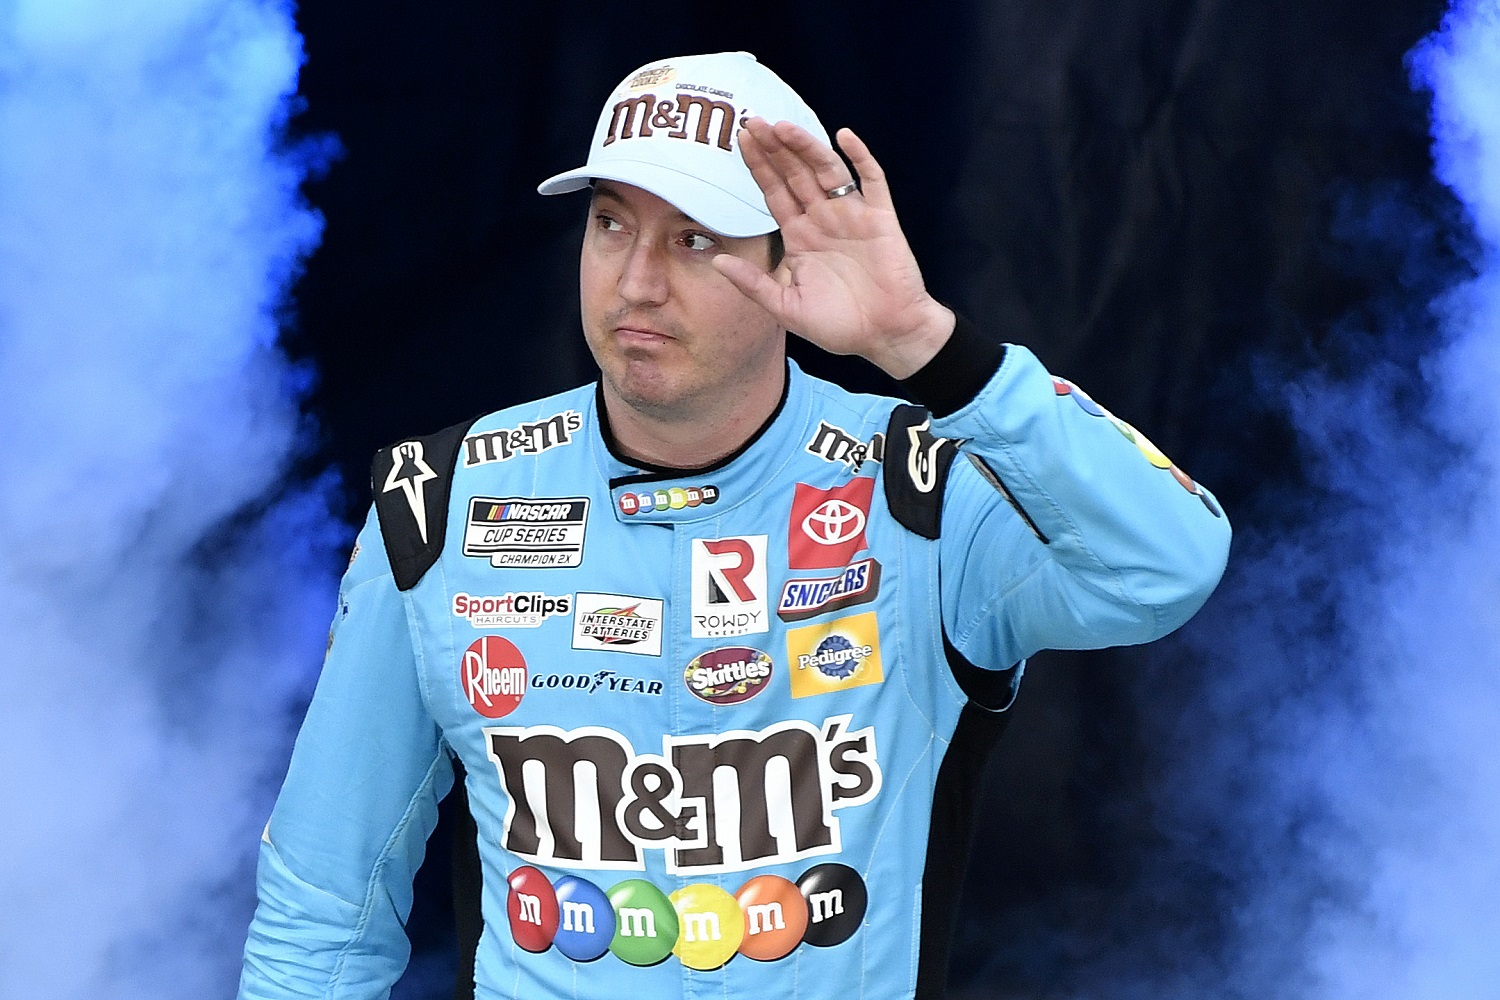 Kyle Busch waves to fans during driver intros prior to the NASCAR Cup Series Food City Dirt Race at Bristol Motor Speedway on April 17, 2022.